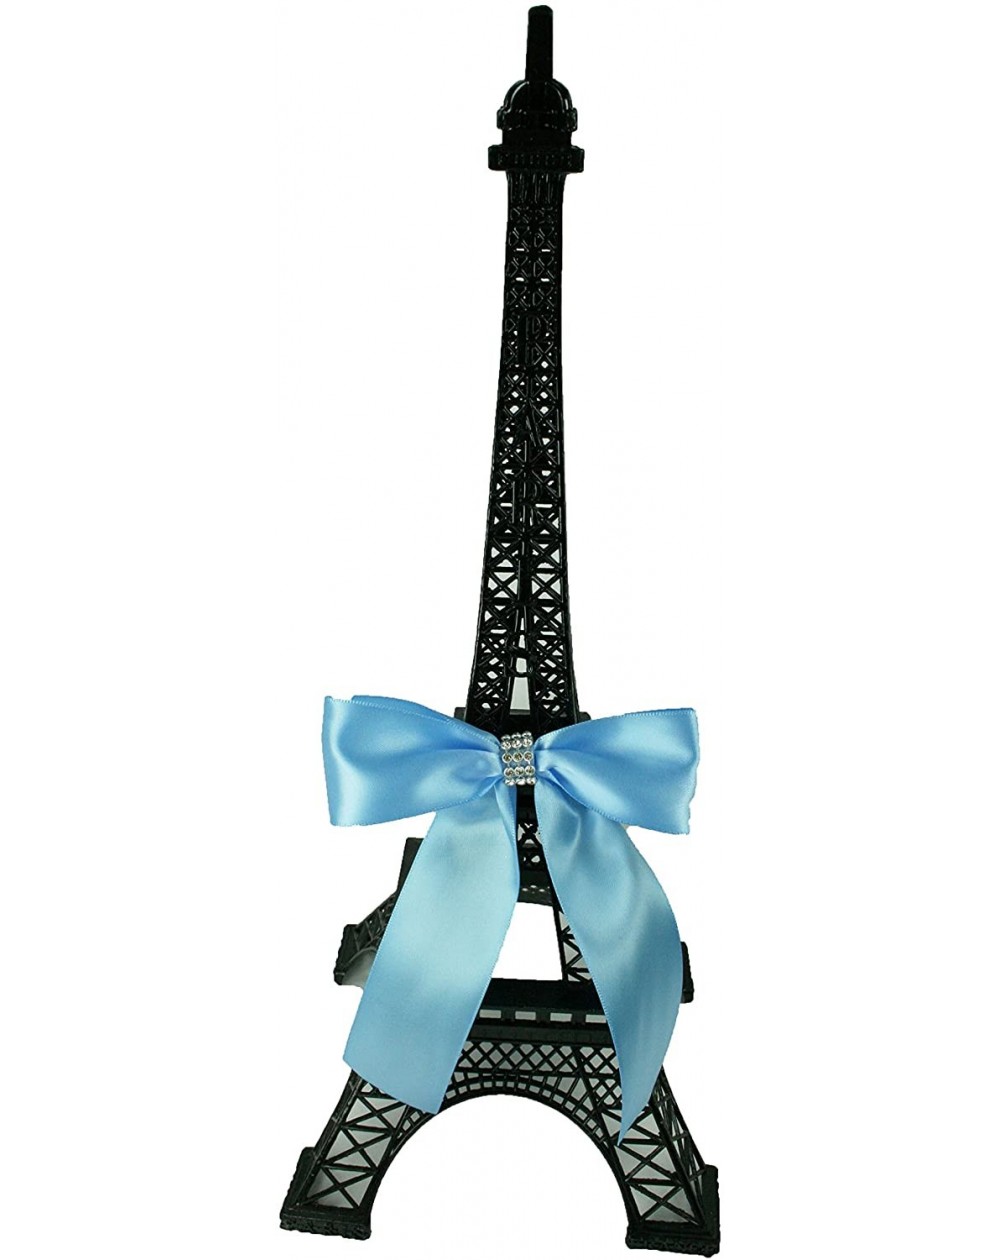 Cake Decorating Supplies 6" Tall Black Metal Eiffel Tower Cake Topper with Satin Bow Designed with Rhinestones Choose Bow Col...